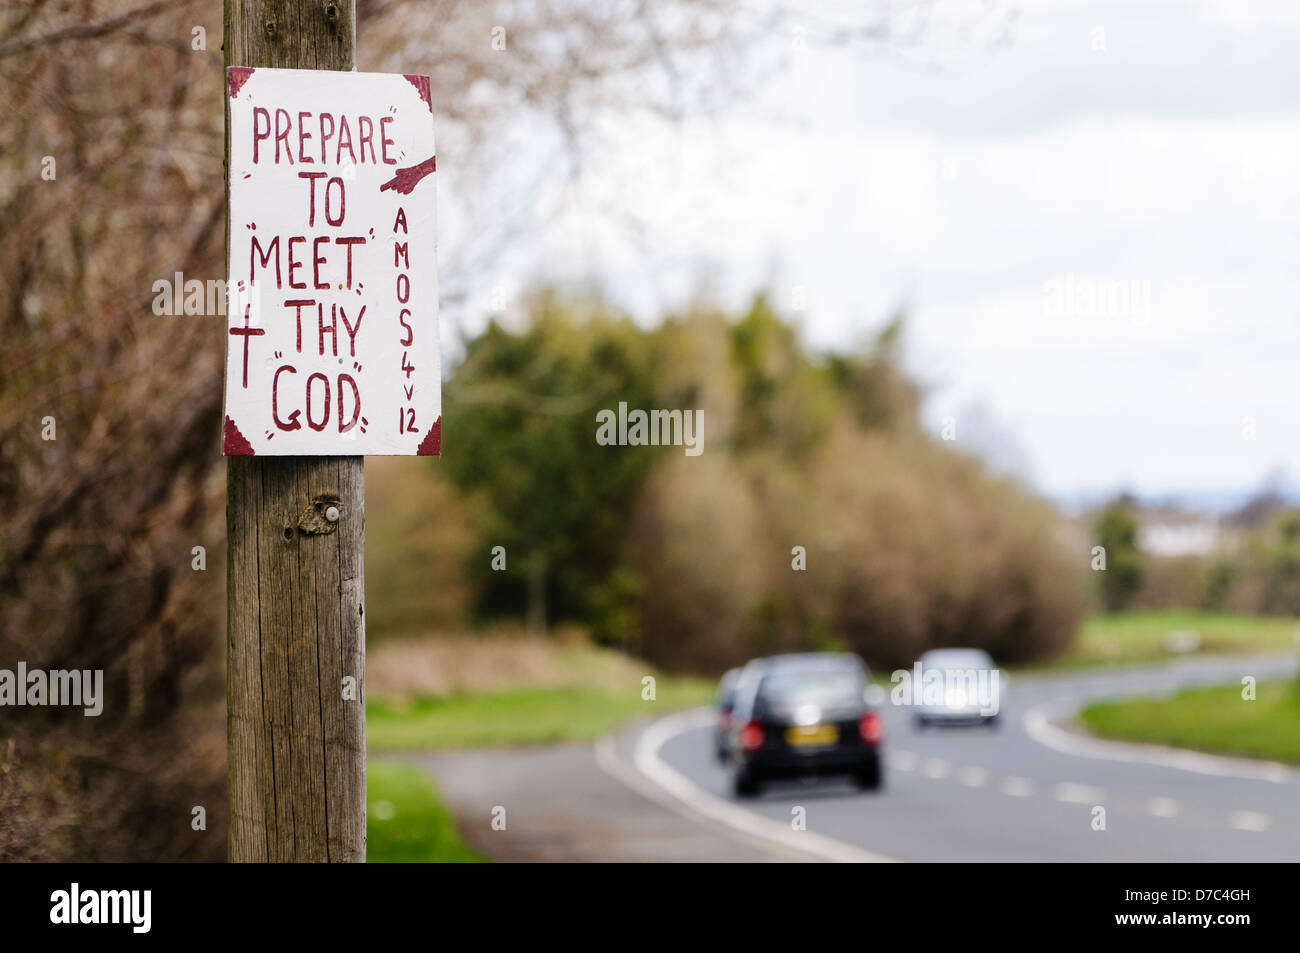 Religious sign typical of many erected in rural Protestant areas of Northern Ireland. 'Prepare to meet thy God'  Amos 4:12 Stock Photo